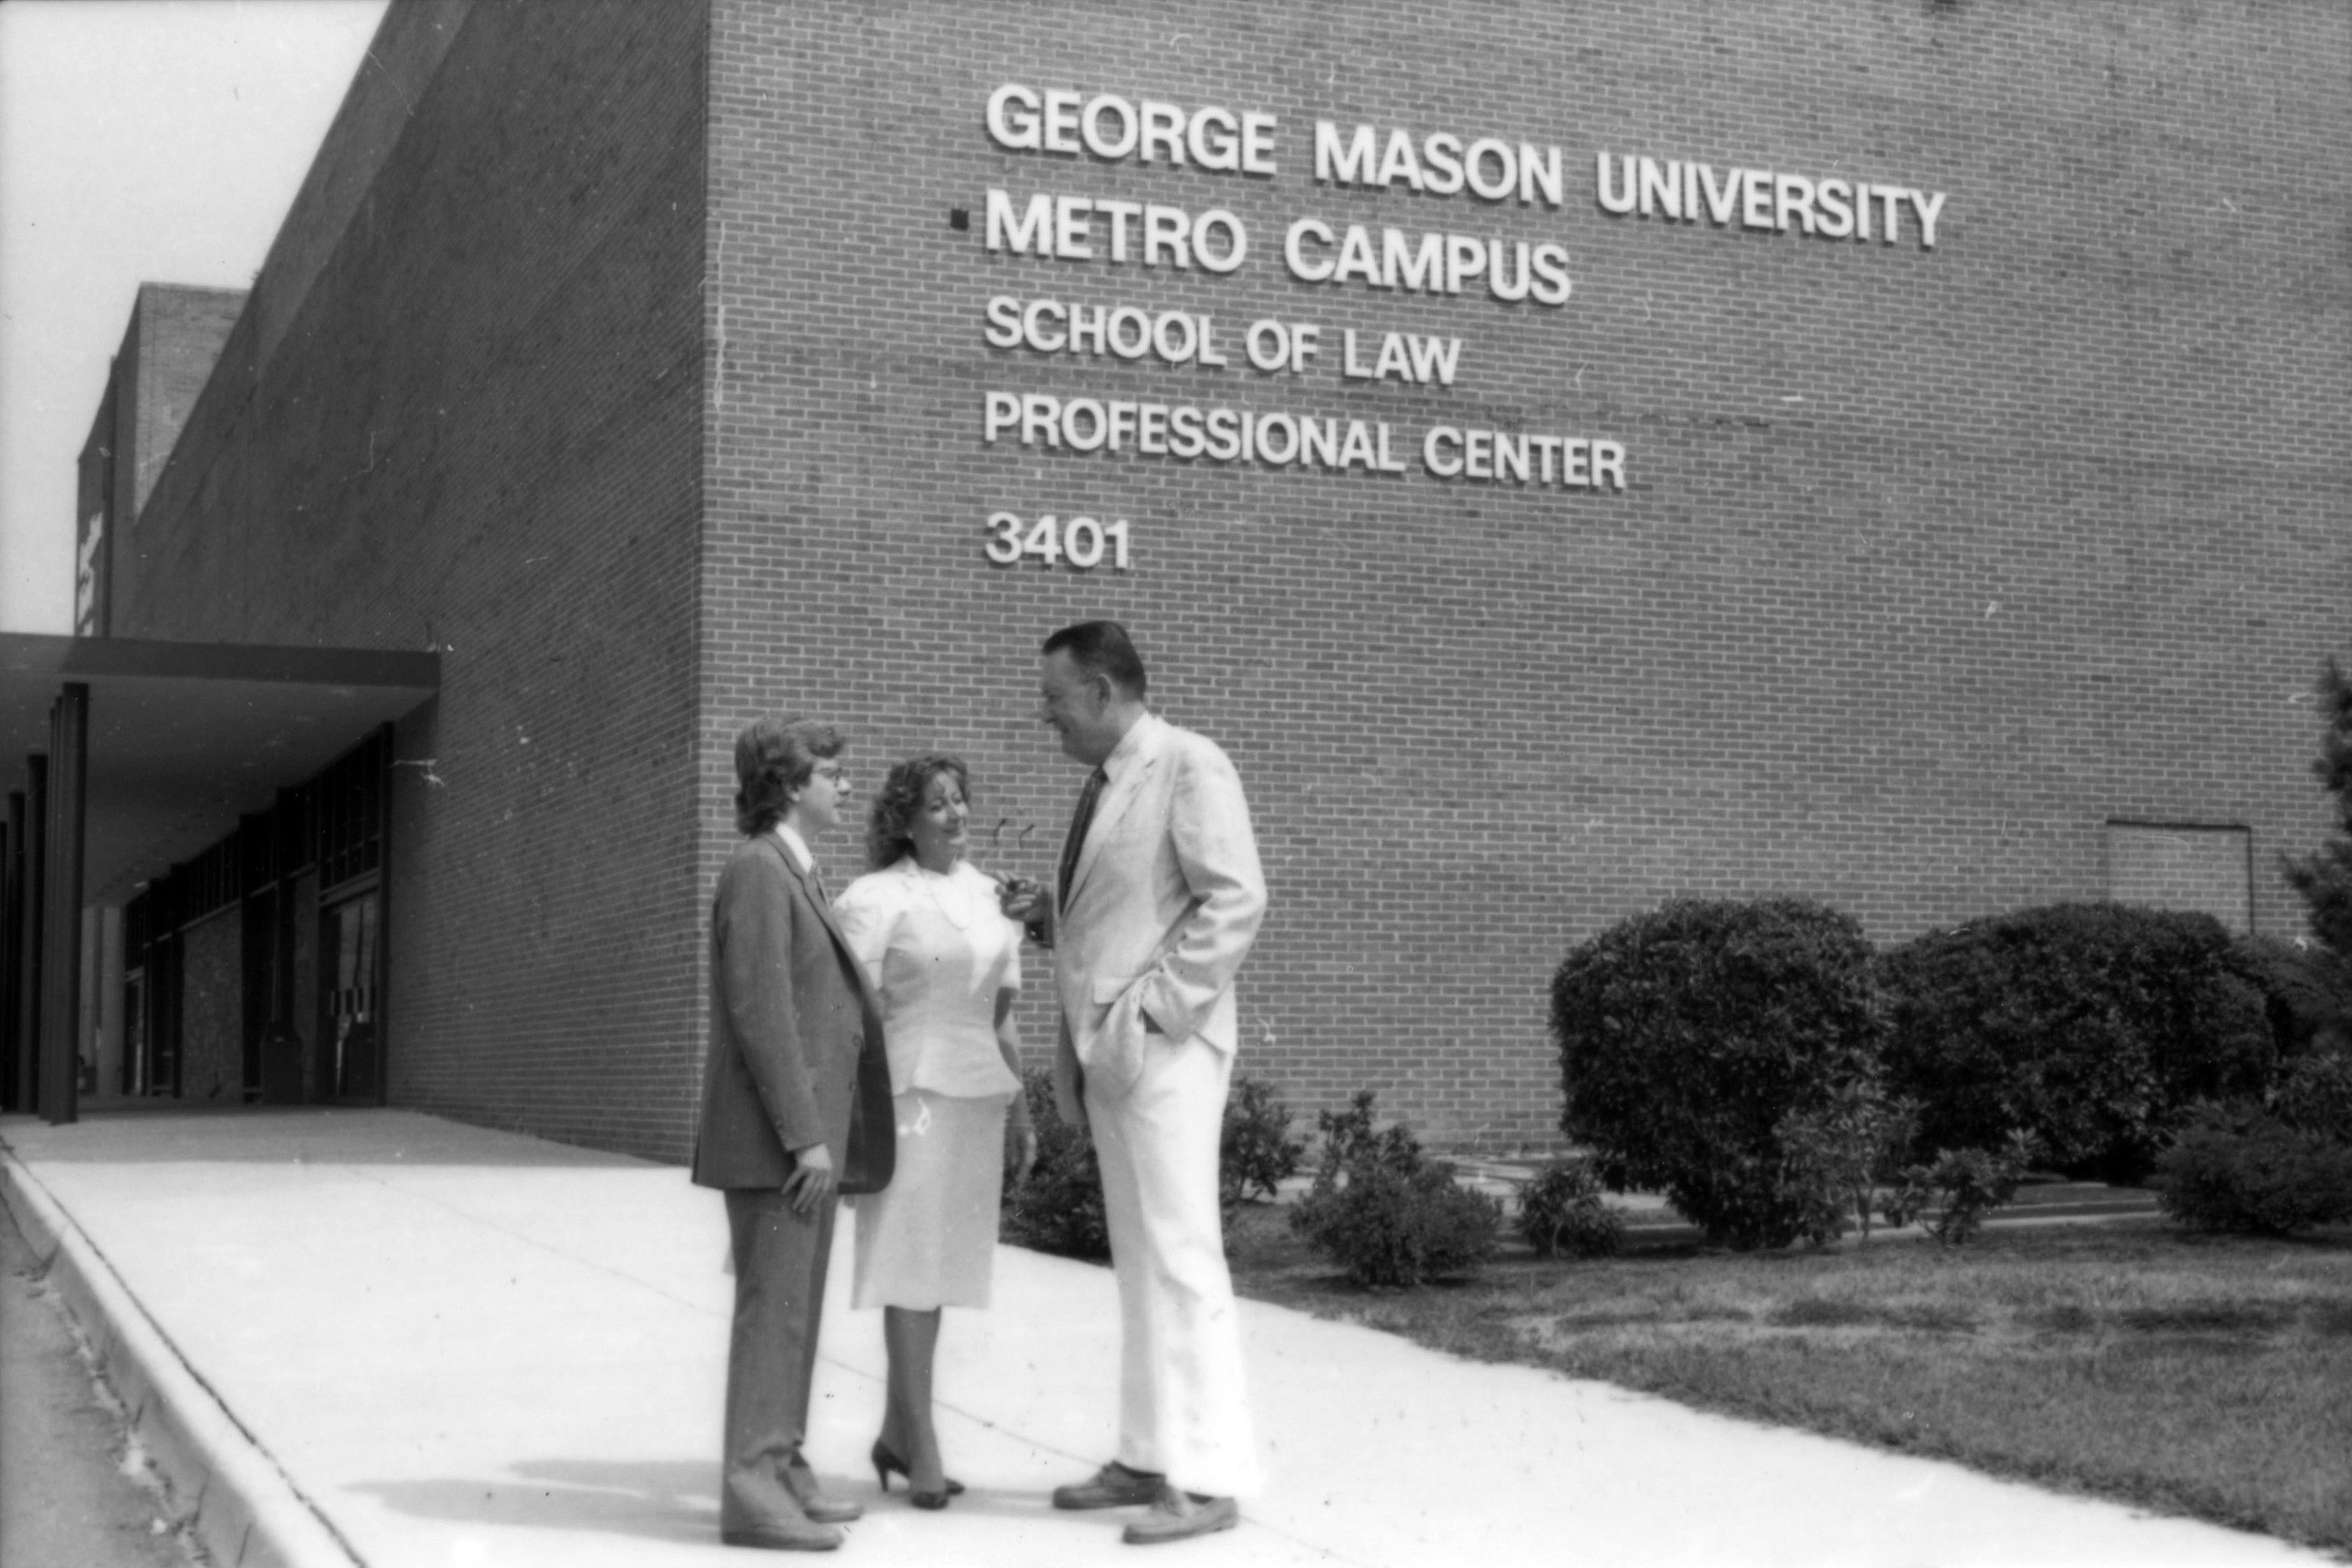 John T. “Til” Hazel and students in front of the George Mason University School of Law, July 31, 1987.